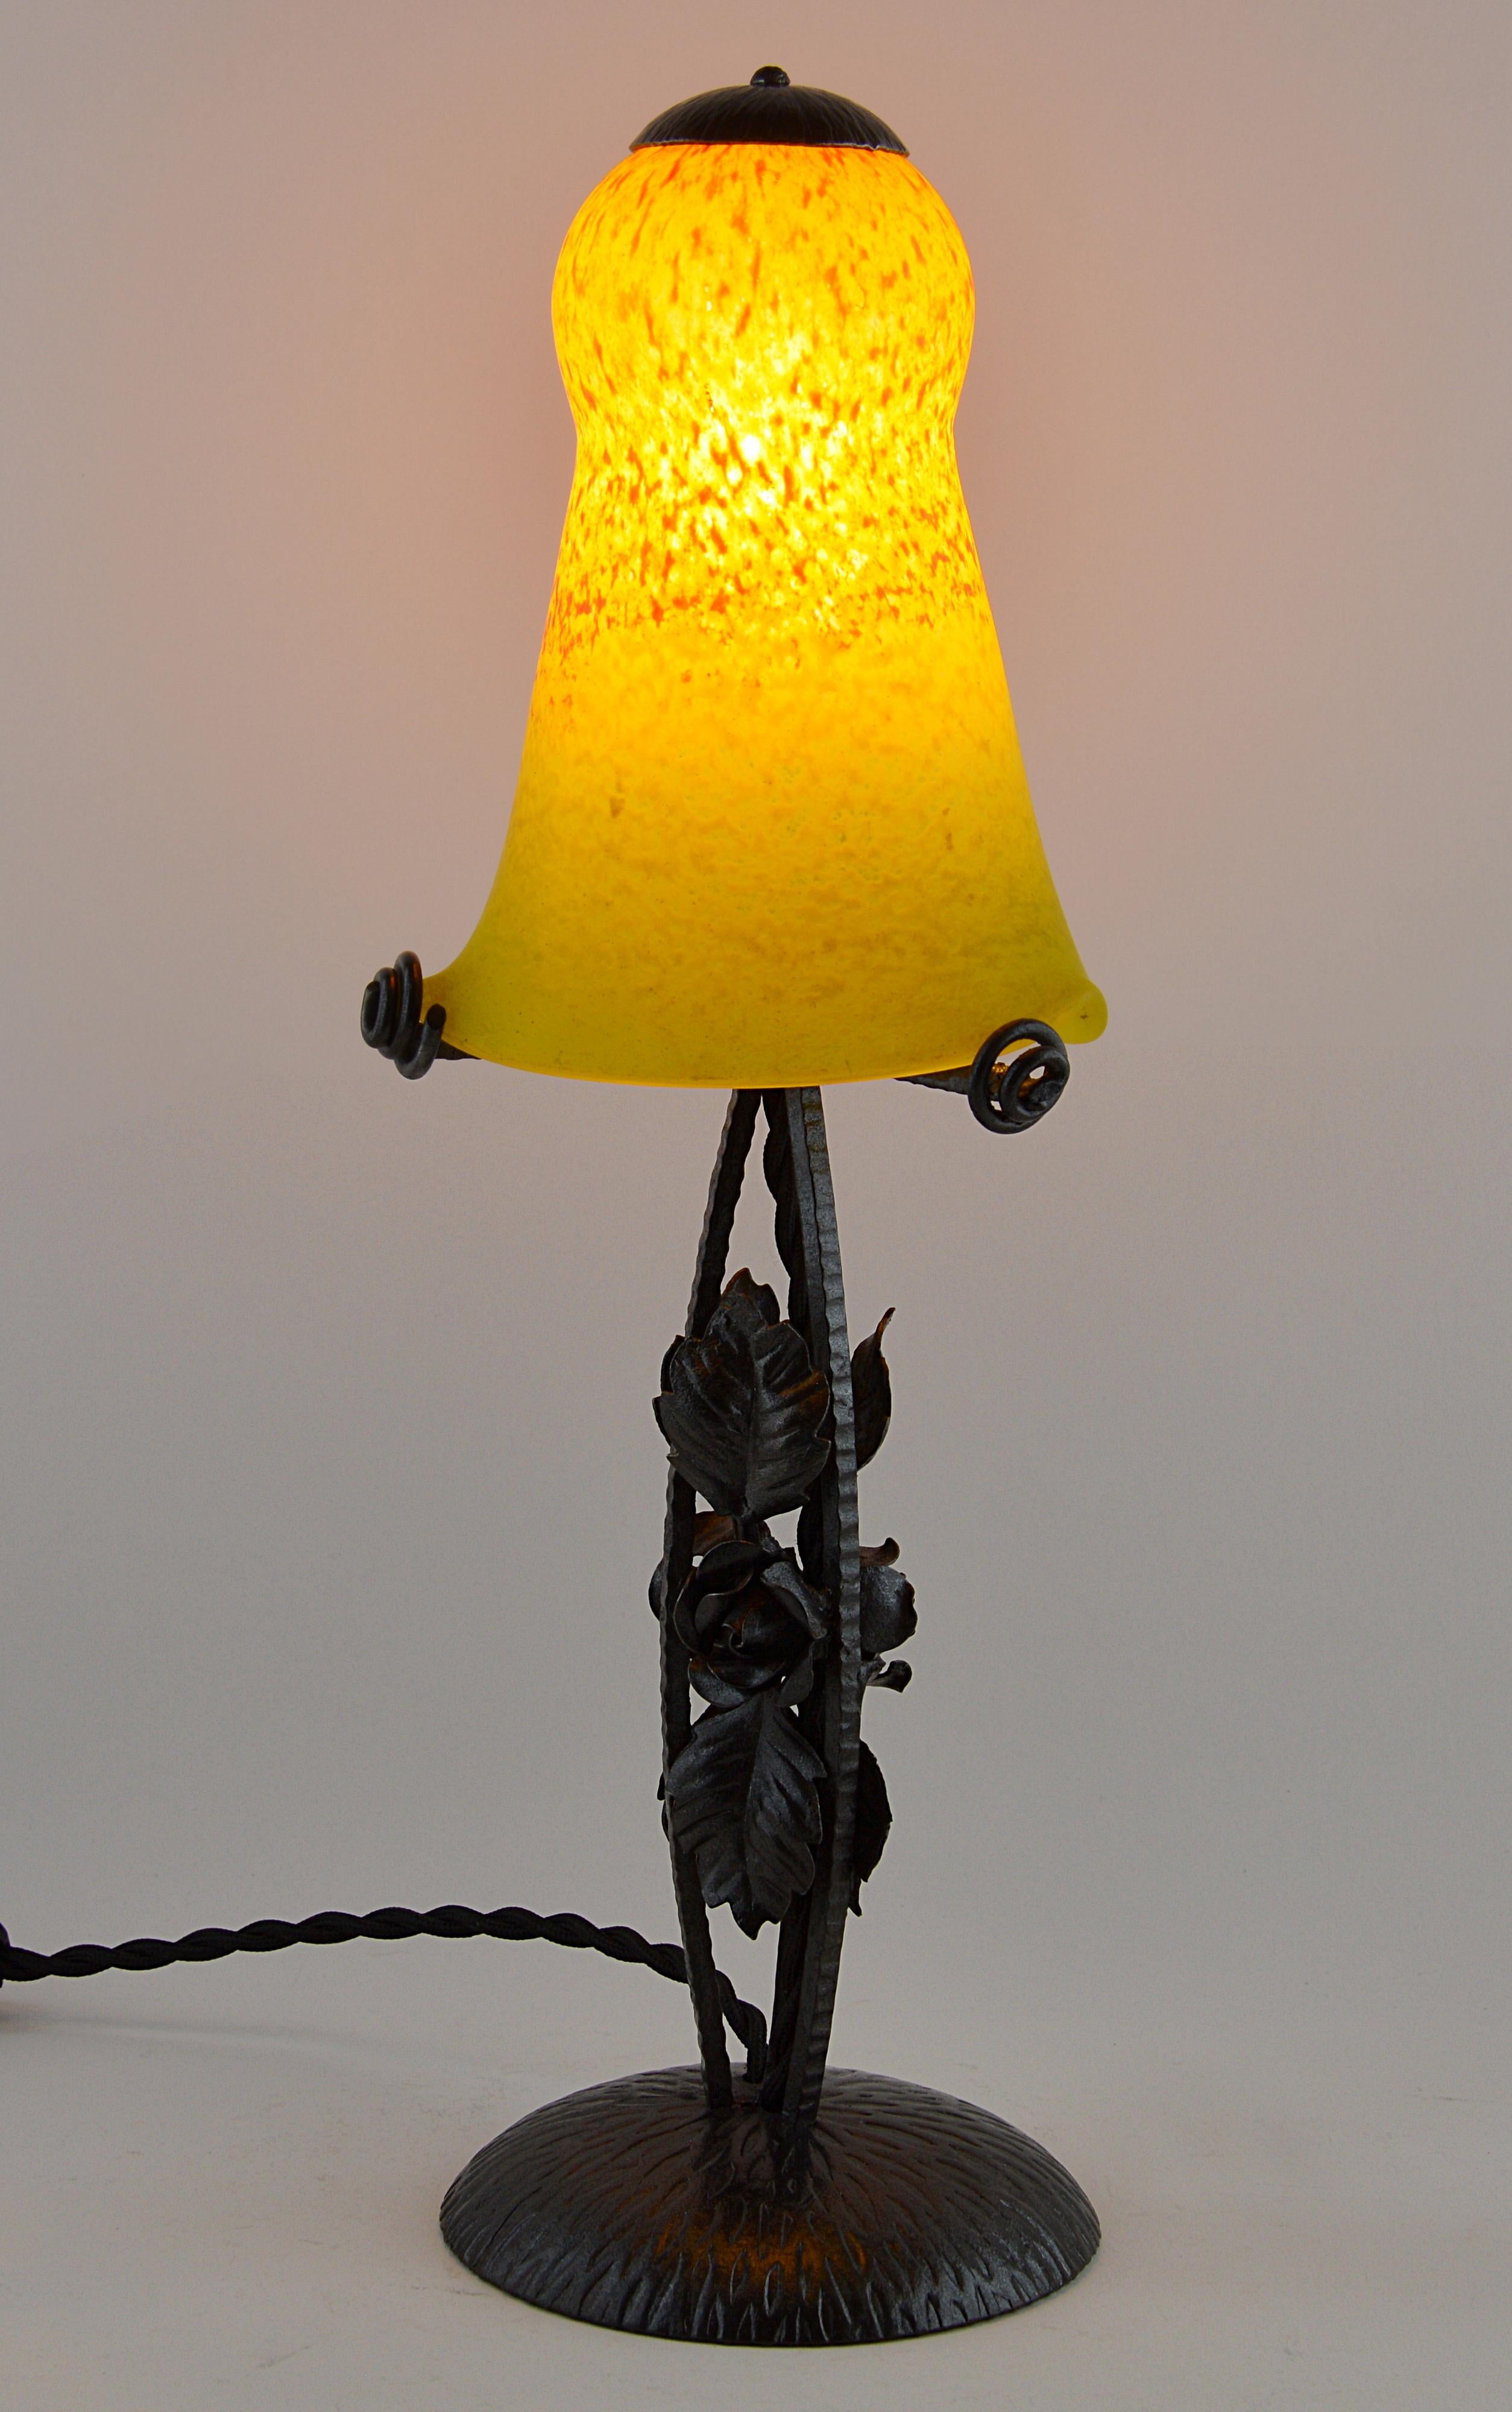 Pair of French Art Deco table lamp from a pair by Andre Delatte (Jarville, near Nancy), France, late 1920s. Glass and wrought iron. Mottled blown double glass shade. Colors: Yellow and red. Wrought iron base by Morin & Cie, 51 rue Flachet,